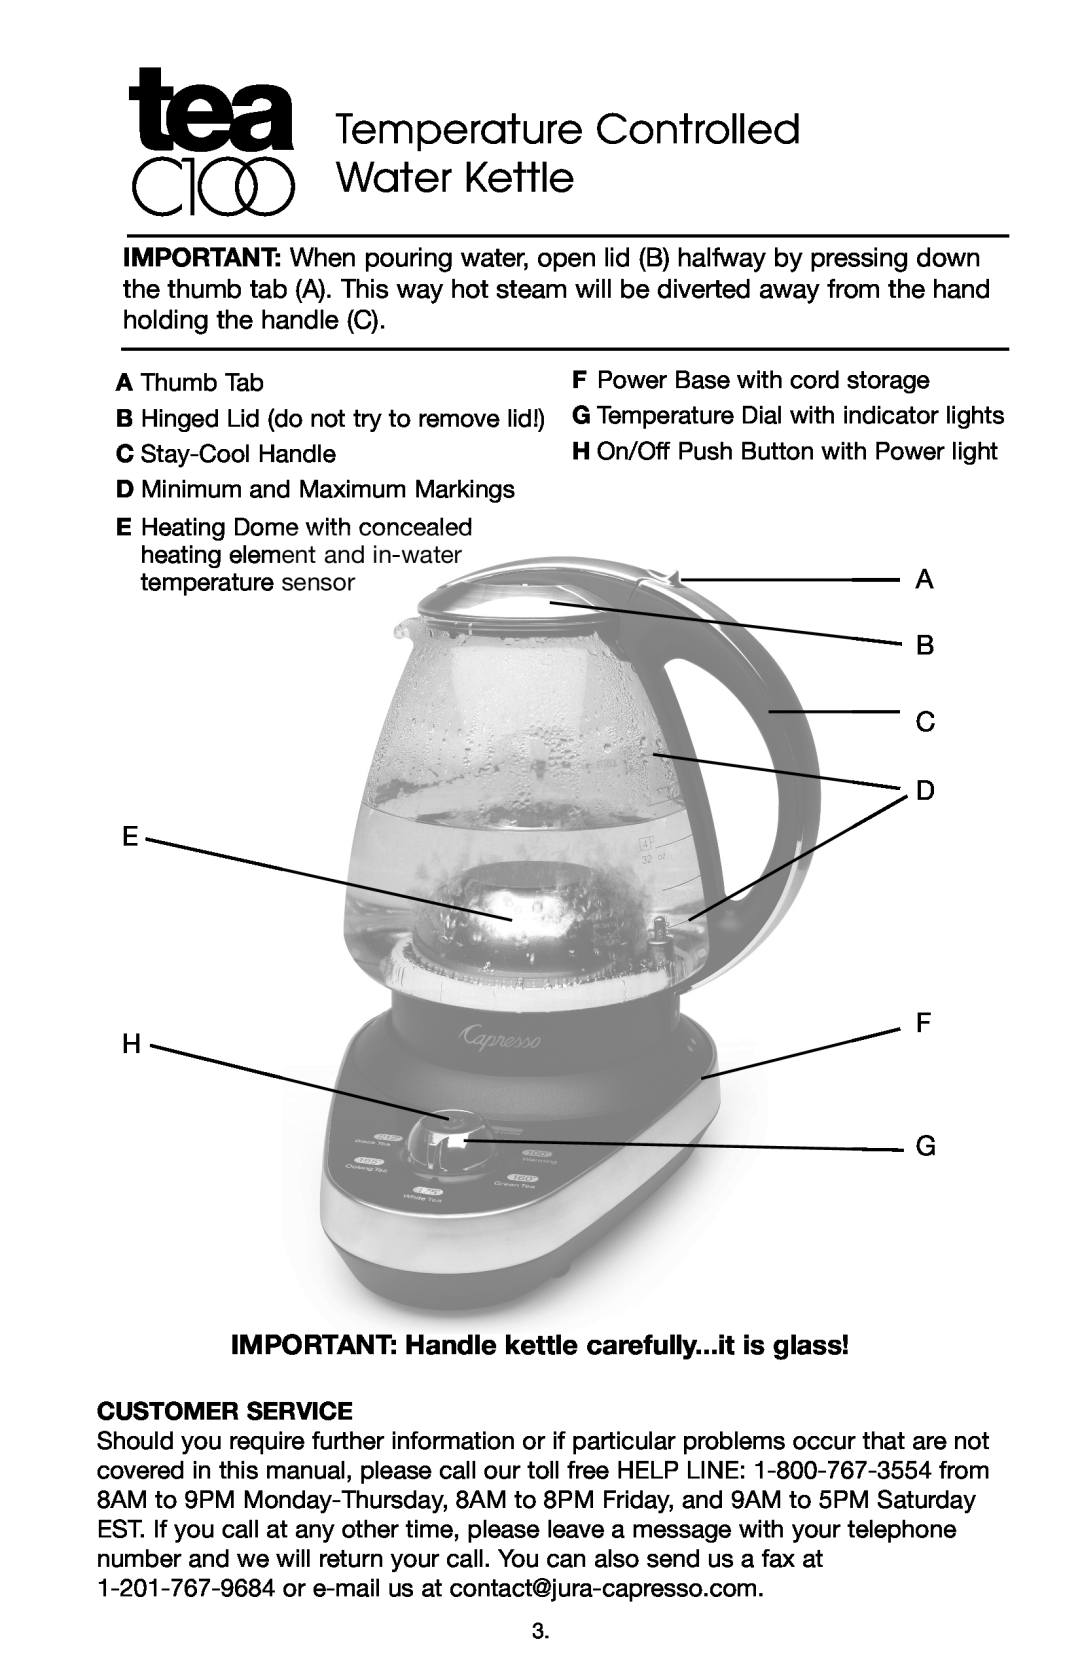 Capresso #261 IMPORTANT Handle kettle carefully...it is glass, Customer Service, C1OO, Temperature Controlled Water Kettle 